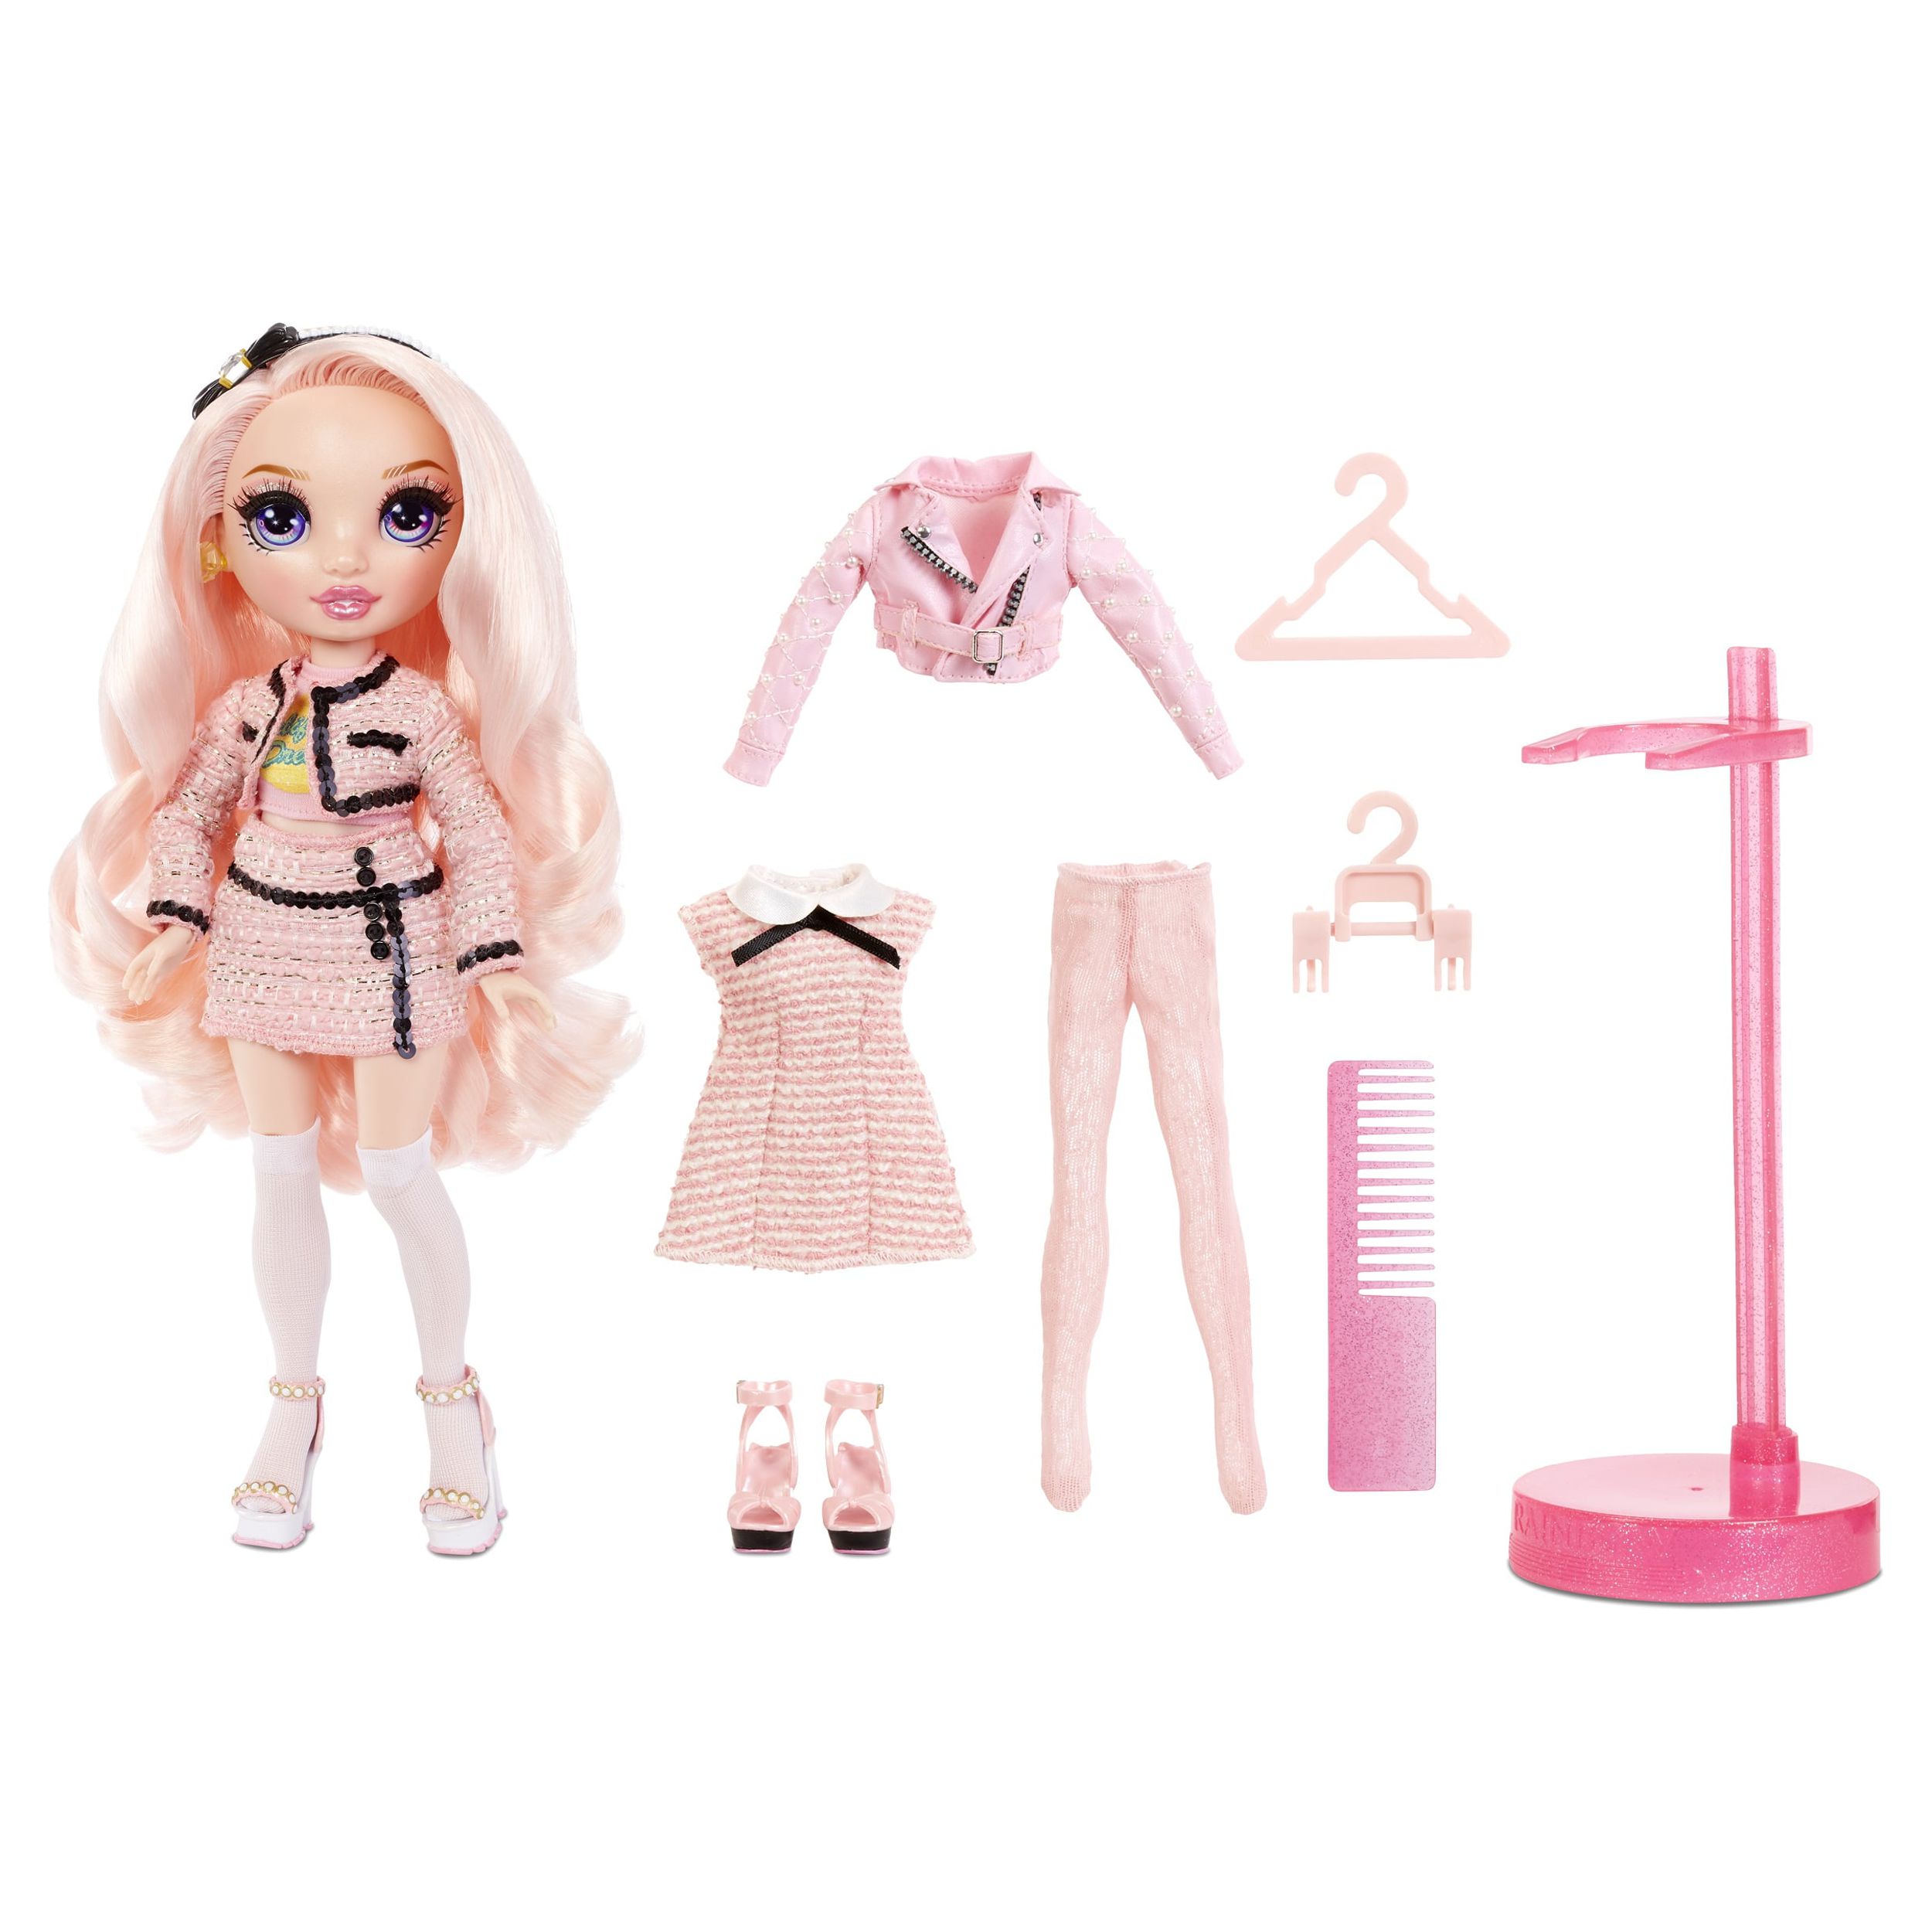 Rainbow High Bella Parker – Pink Fashion Doll with 2 Complete Mix & Match Outfits and Accessories, Toys for Kids 6-12 Years Old - image 3 of 7